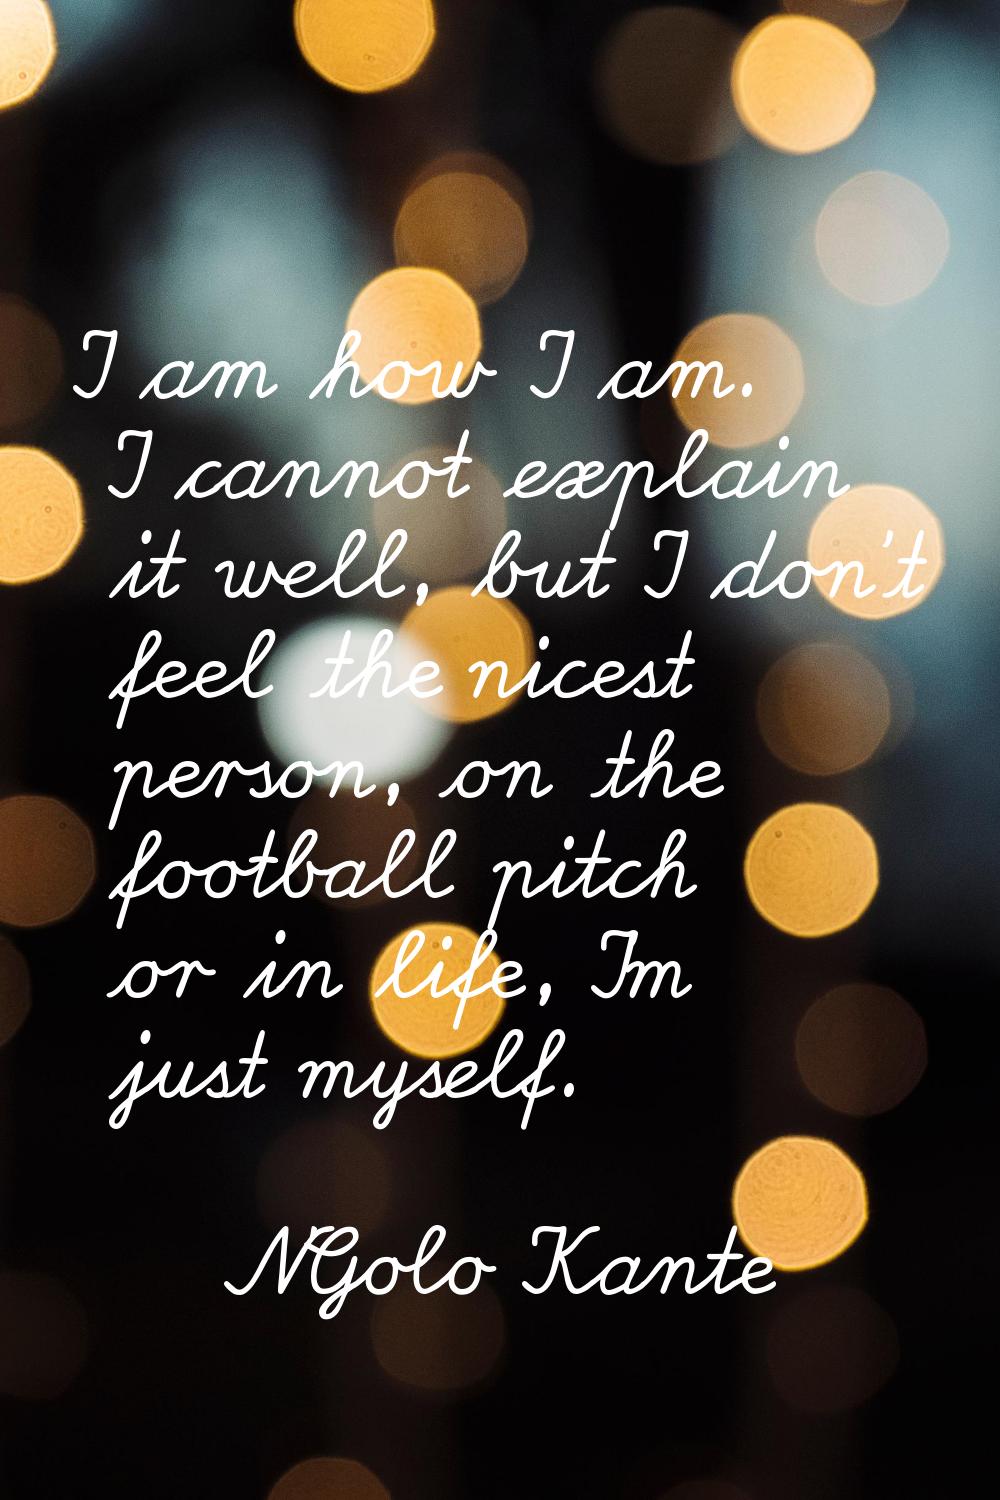 I am how I am. I cannot explain it well, but I don't feel the nicest person, on the football pitch 